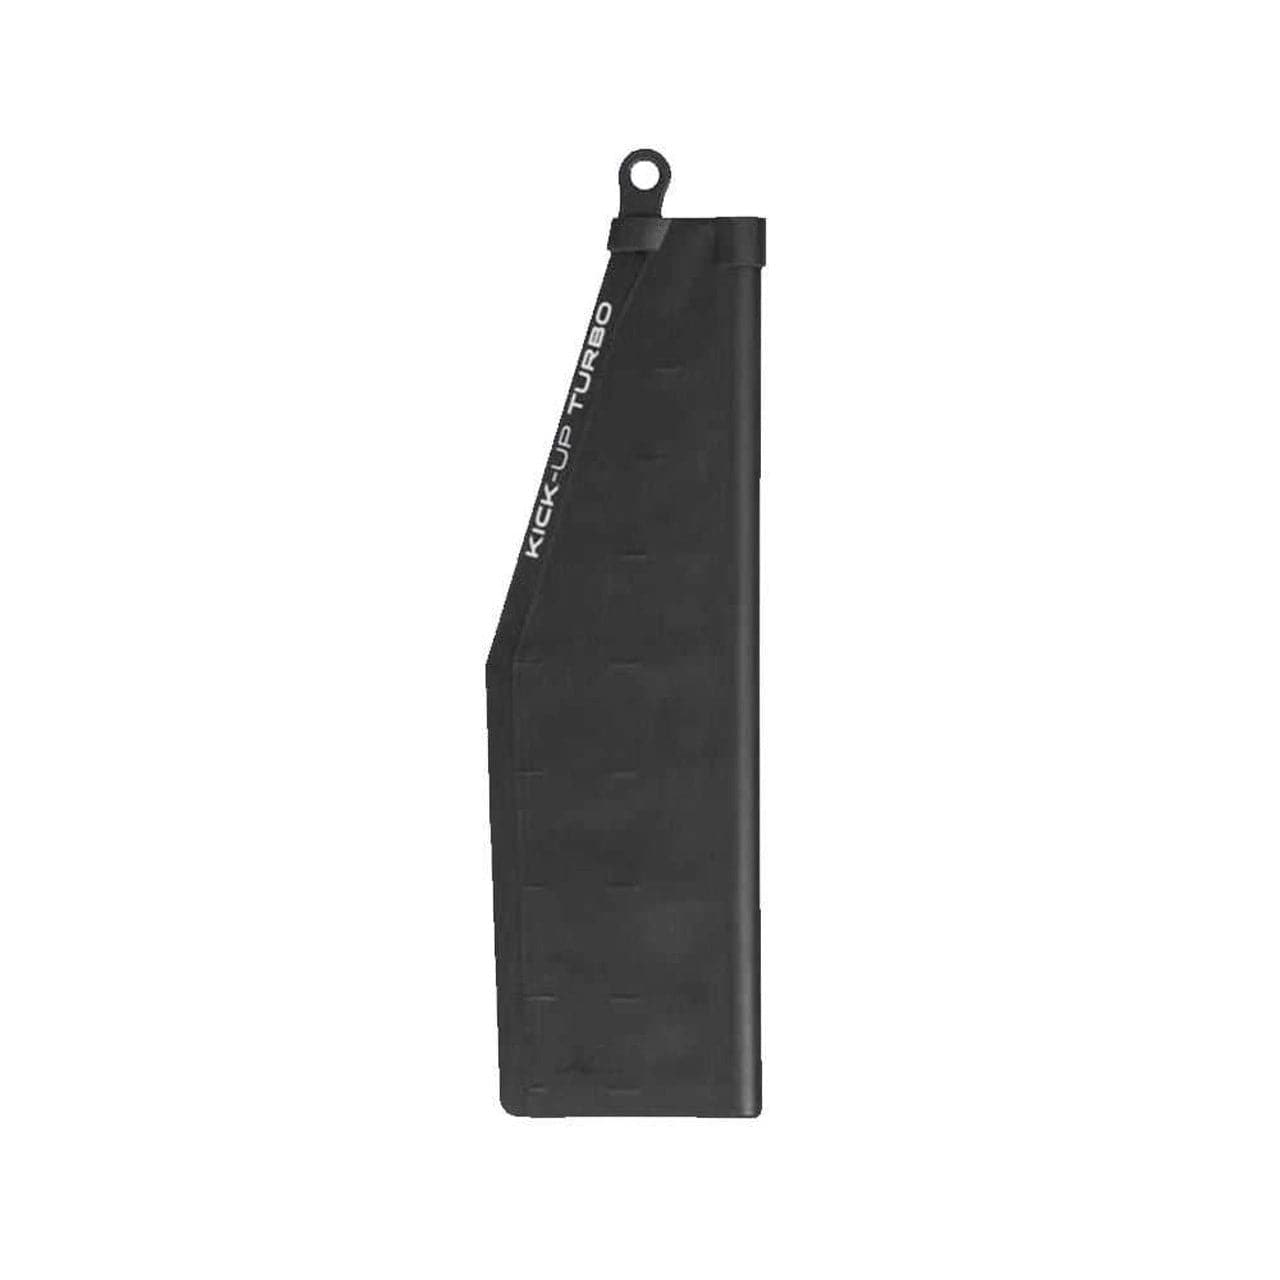 Featuring the MirageDrive Turbo Kick Up Fin hobie accessory, replacement fin manufactured by Hobie shown here from one angle.